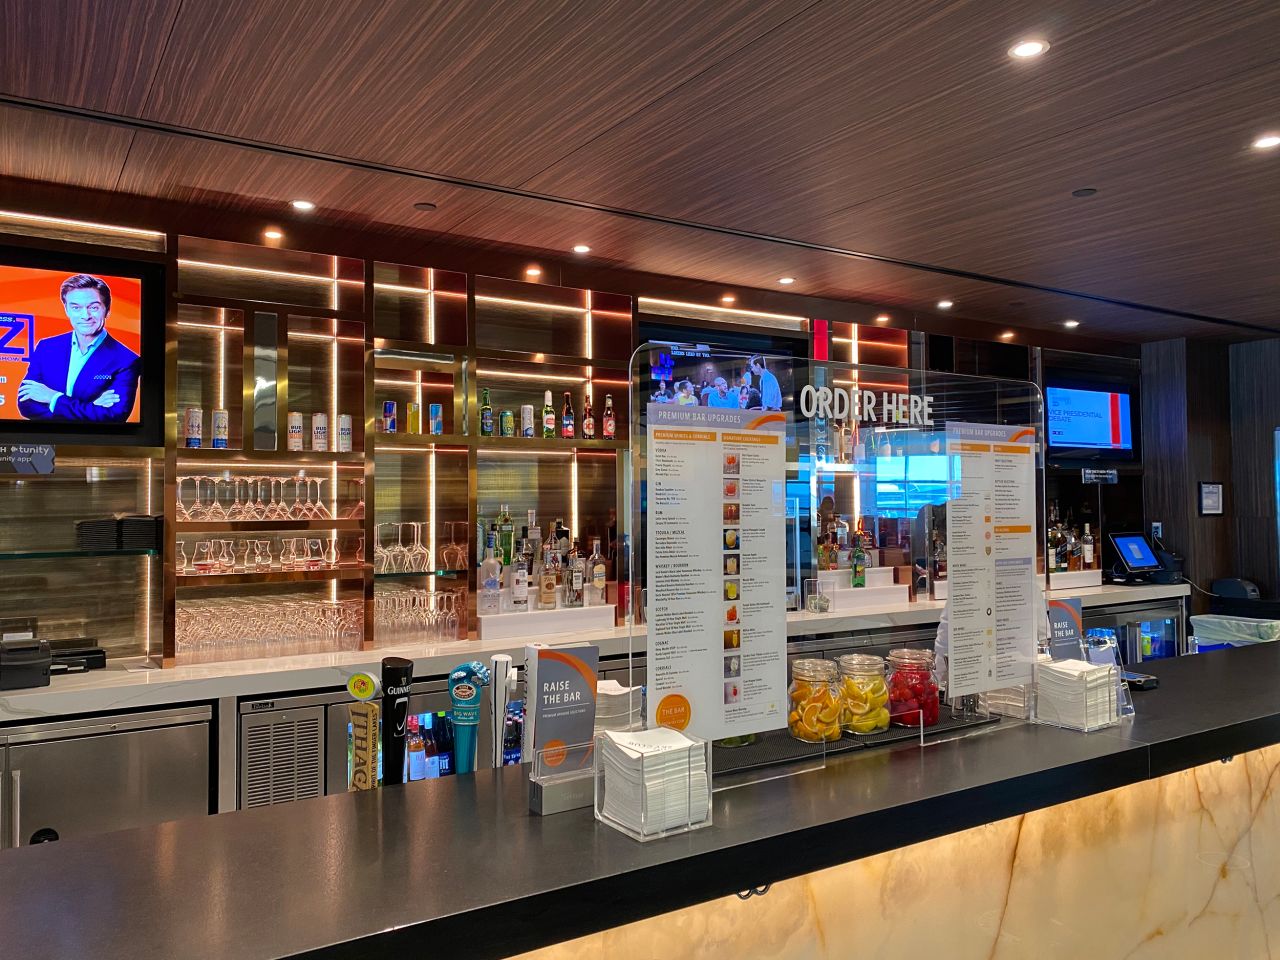 The Sky Club does not allow patrons to sit at the bar, and ordering must be done on the other side of the plexiglass.